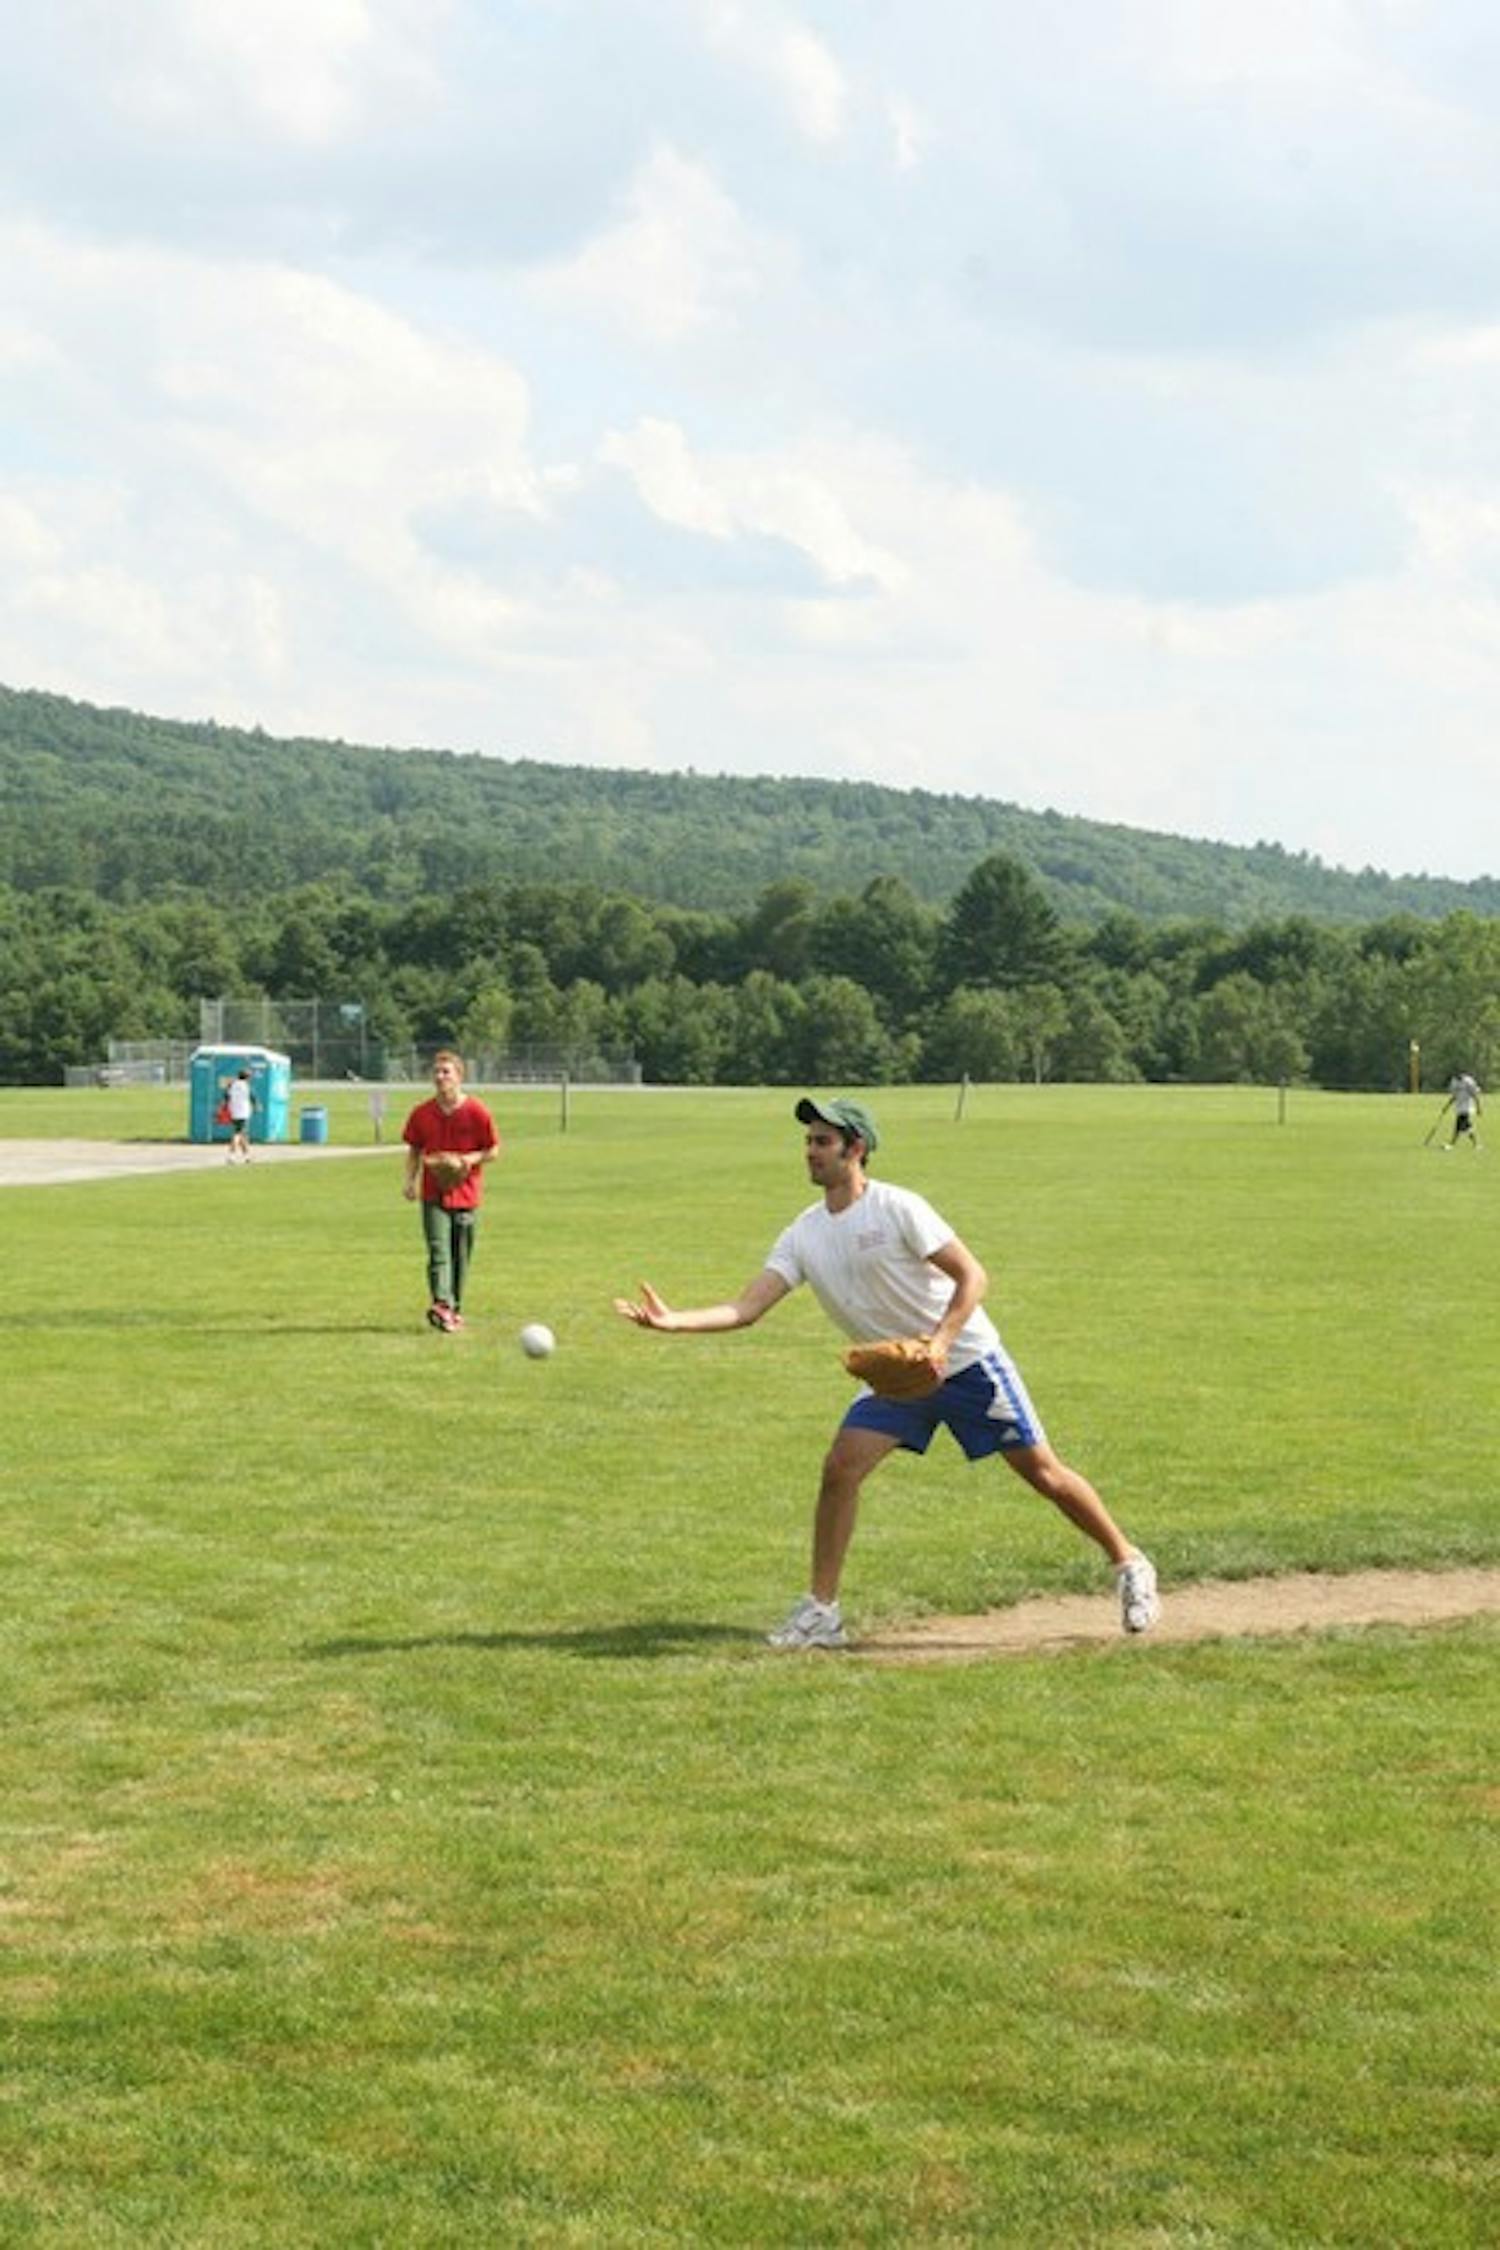 Bret Tenenhaus '09, Captain of the Sig Ep softball team, serves up a pitch to his teammates. Sig Ep (5-0) earned the first seed in next week's playoffs.